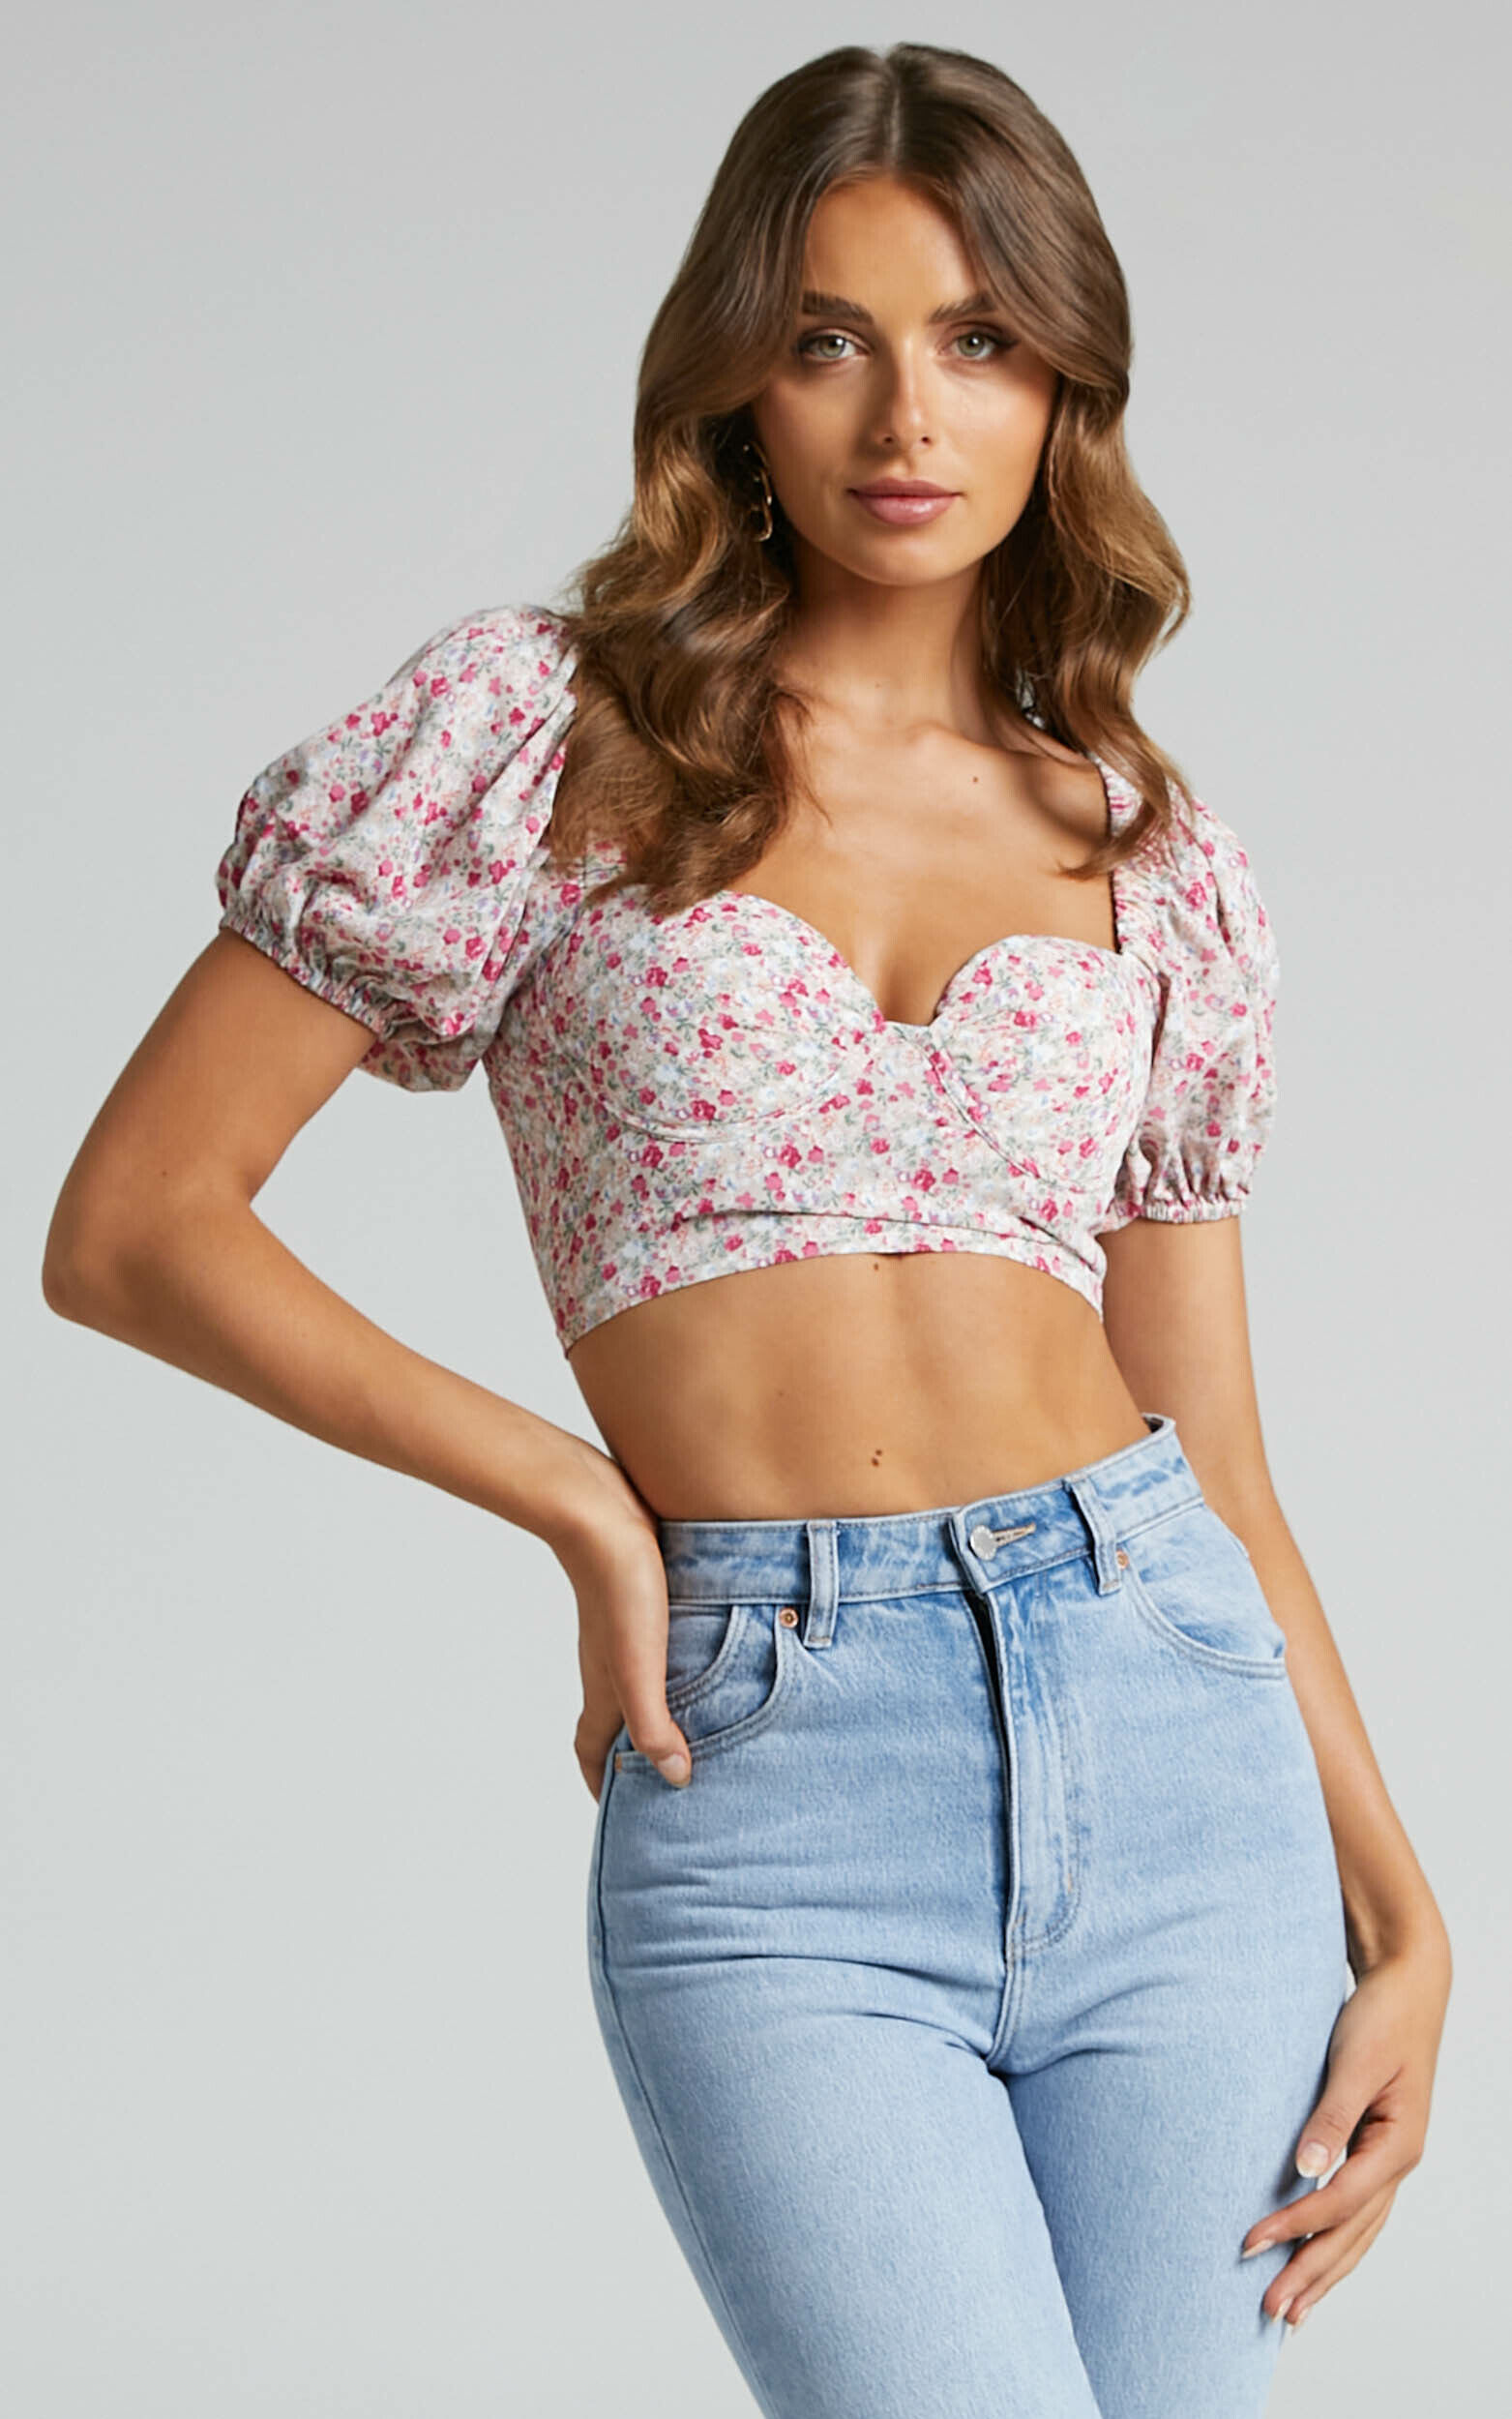 Solania Top - Puff Sleeve Bust Cup Crop Top in White Floral - 04, WHT1